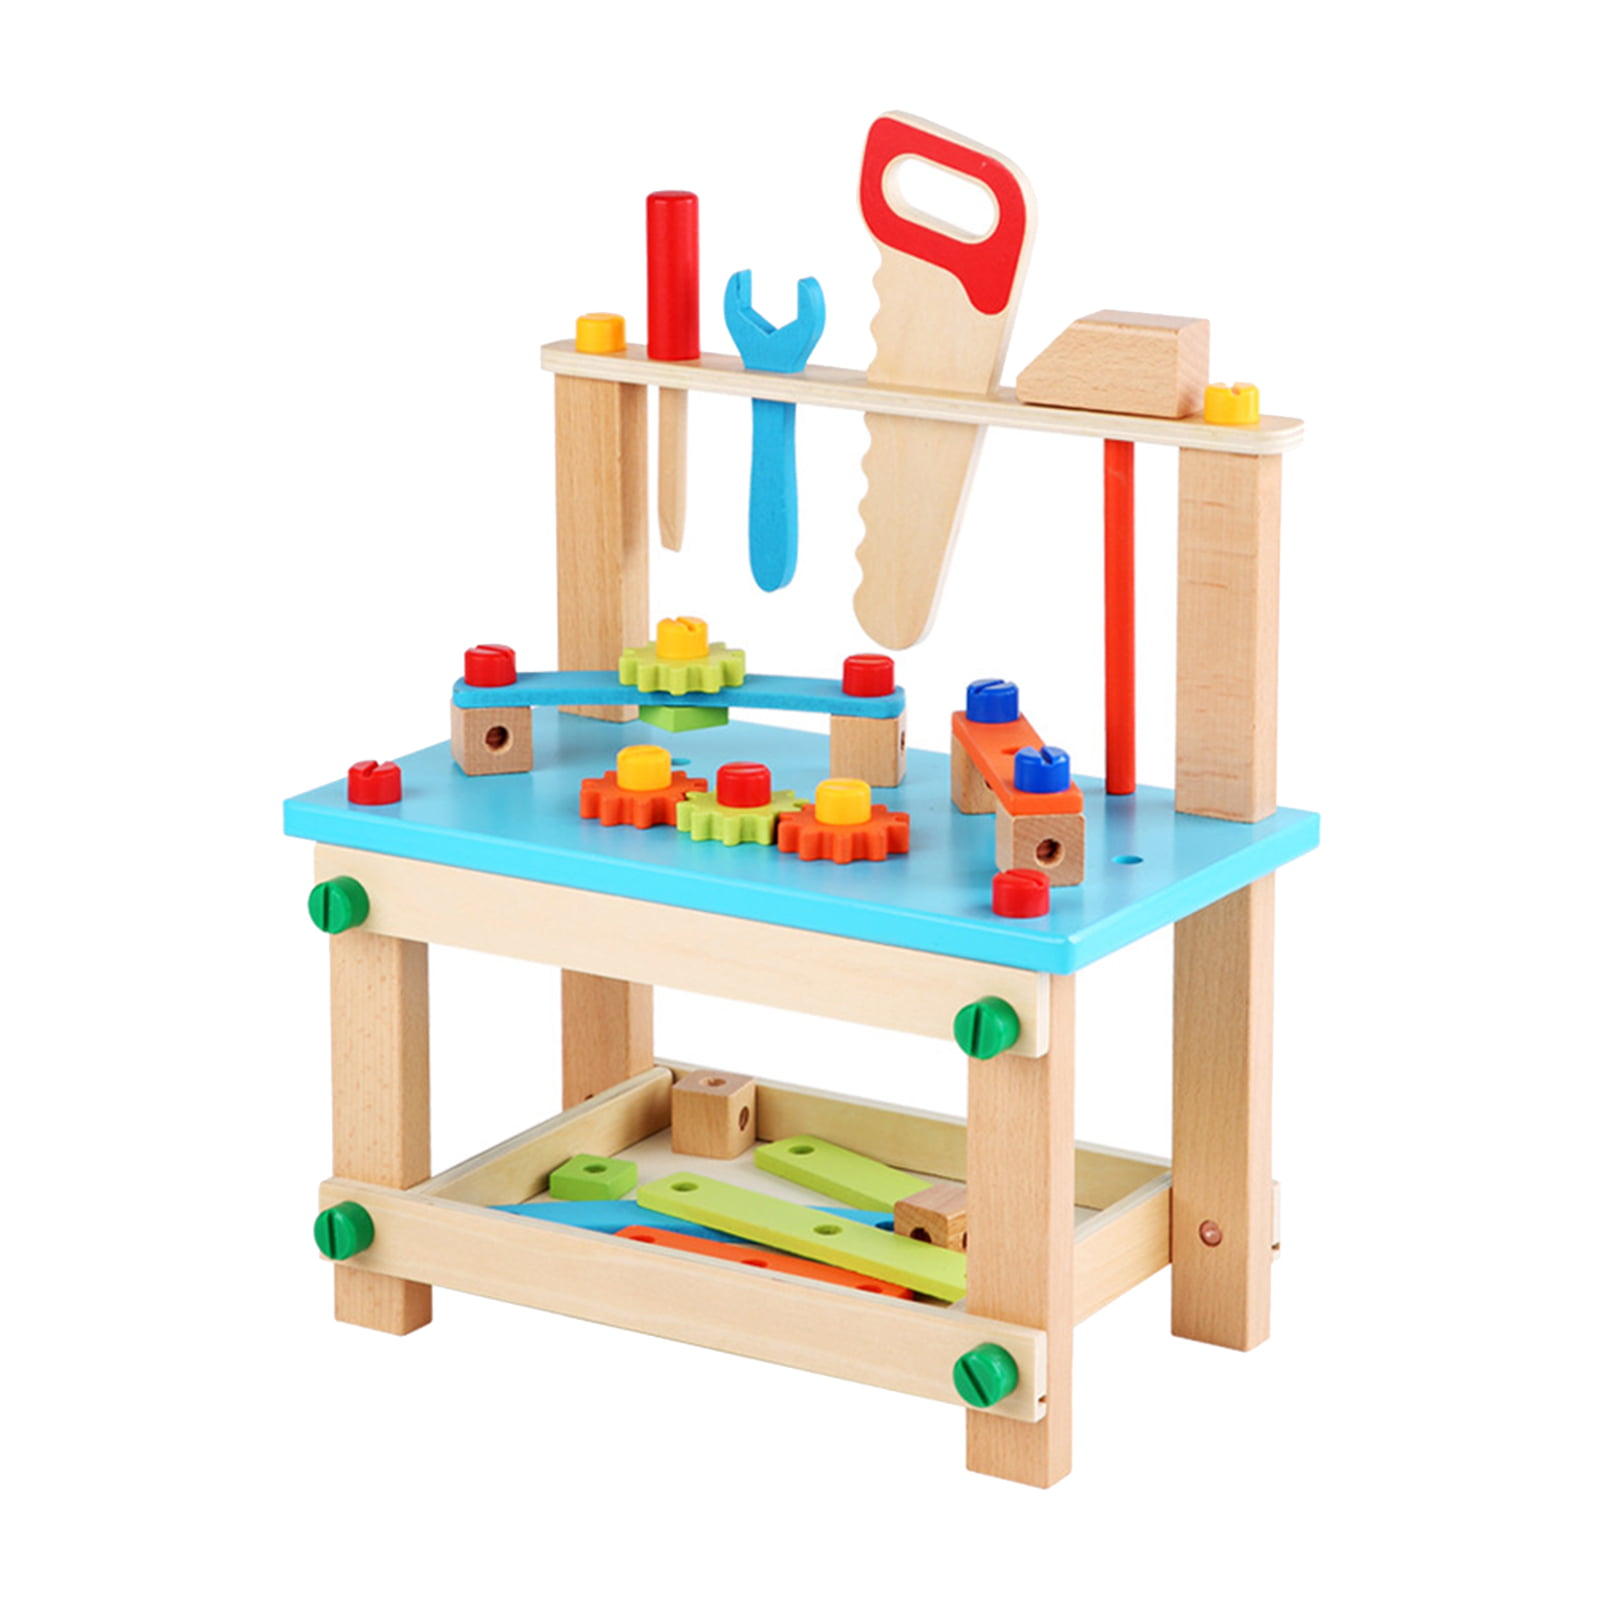 Kids Tool Bench Gift for 3 4 5 Year Old and Up kids tool bench workshop GEMEM Tool Bench Set for Kids Wood Color 9-piece Wooden Tool Bench Toy Wooden Workbench Toy Exercise Hand-eye Coordination 